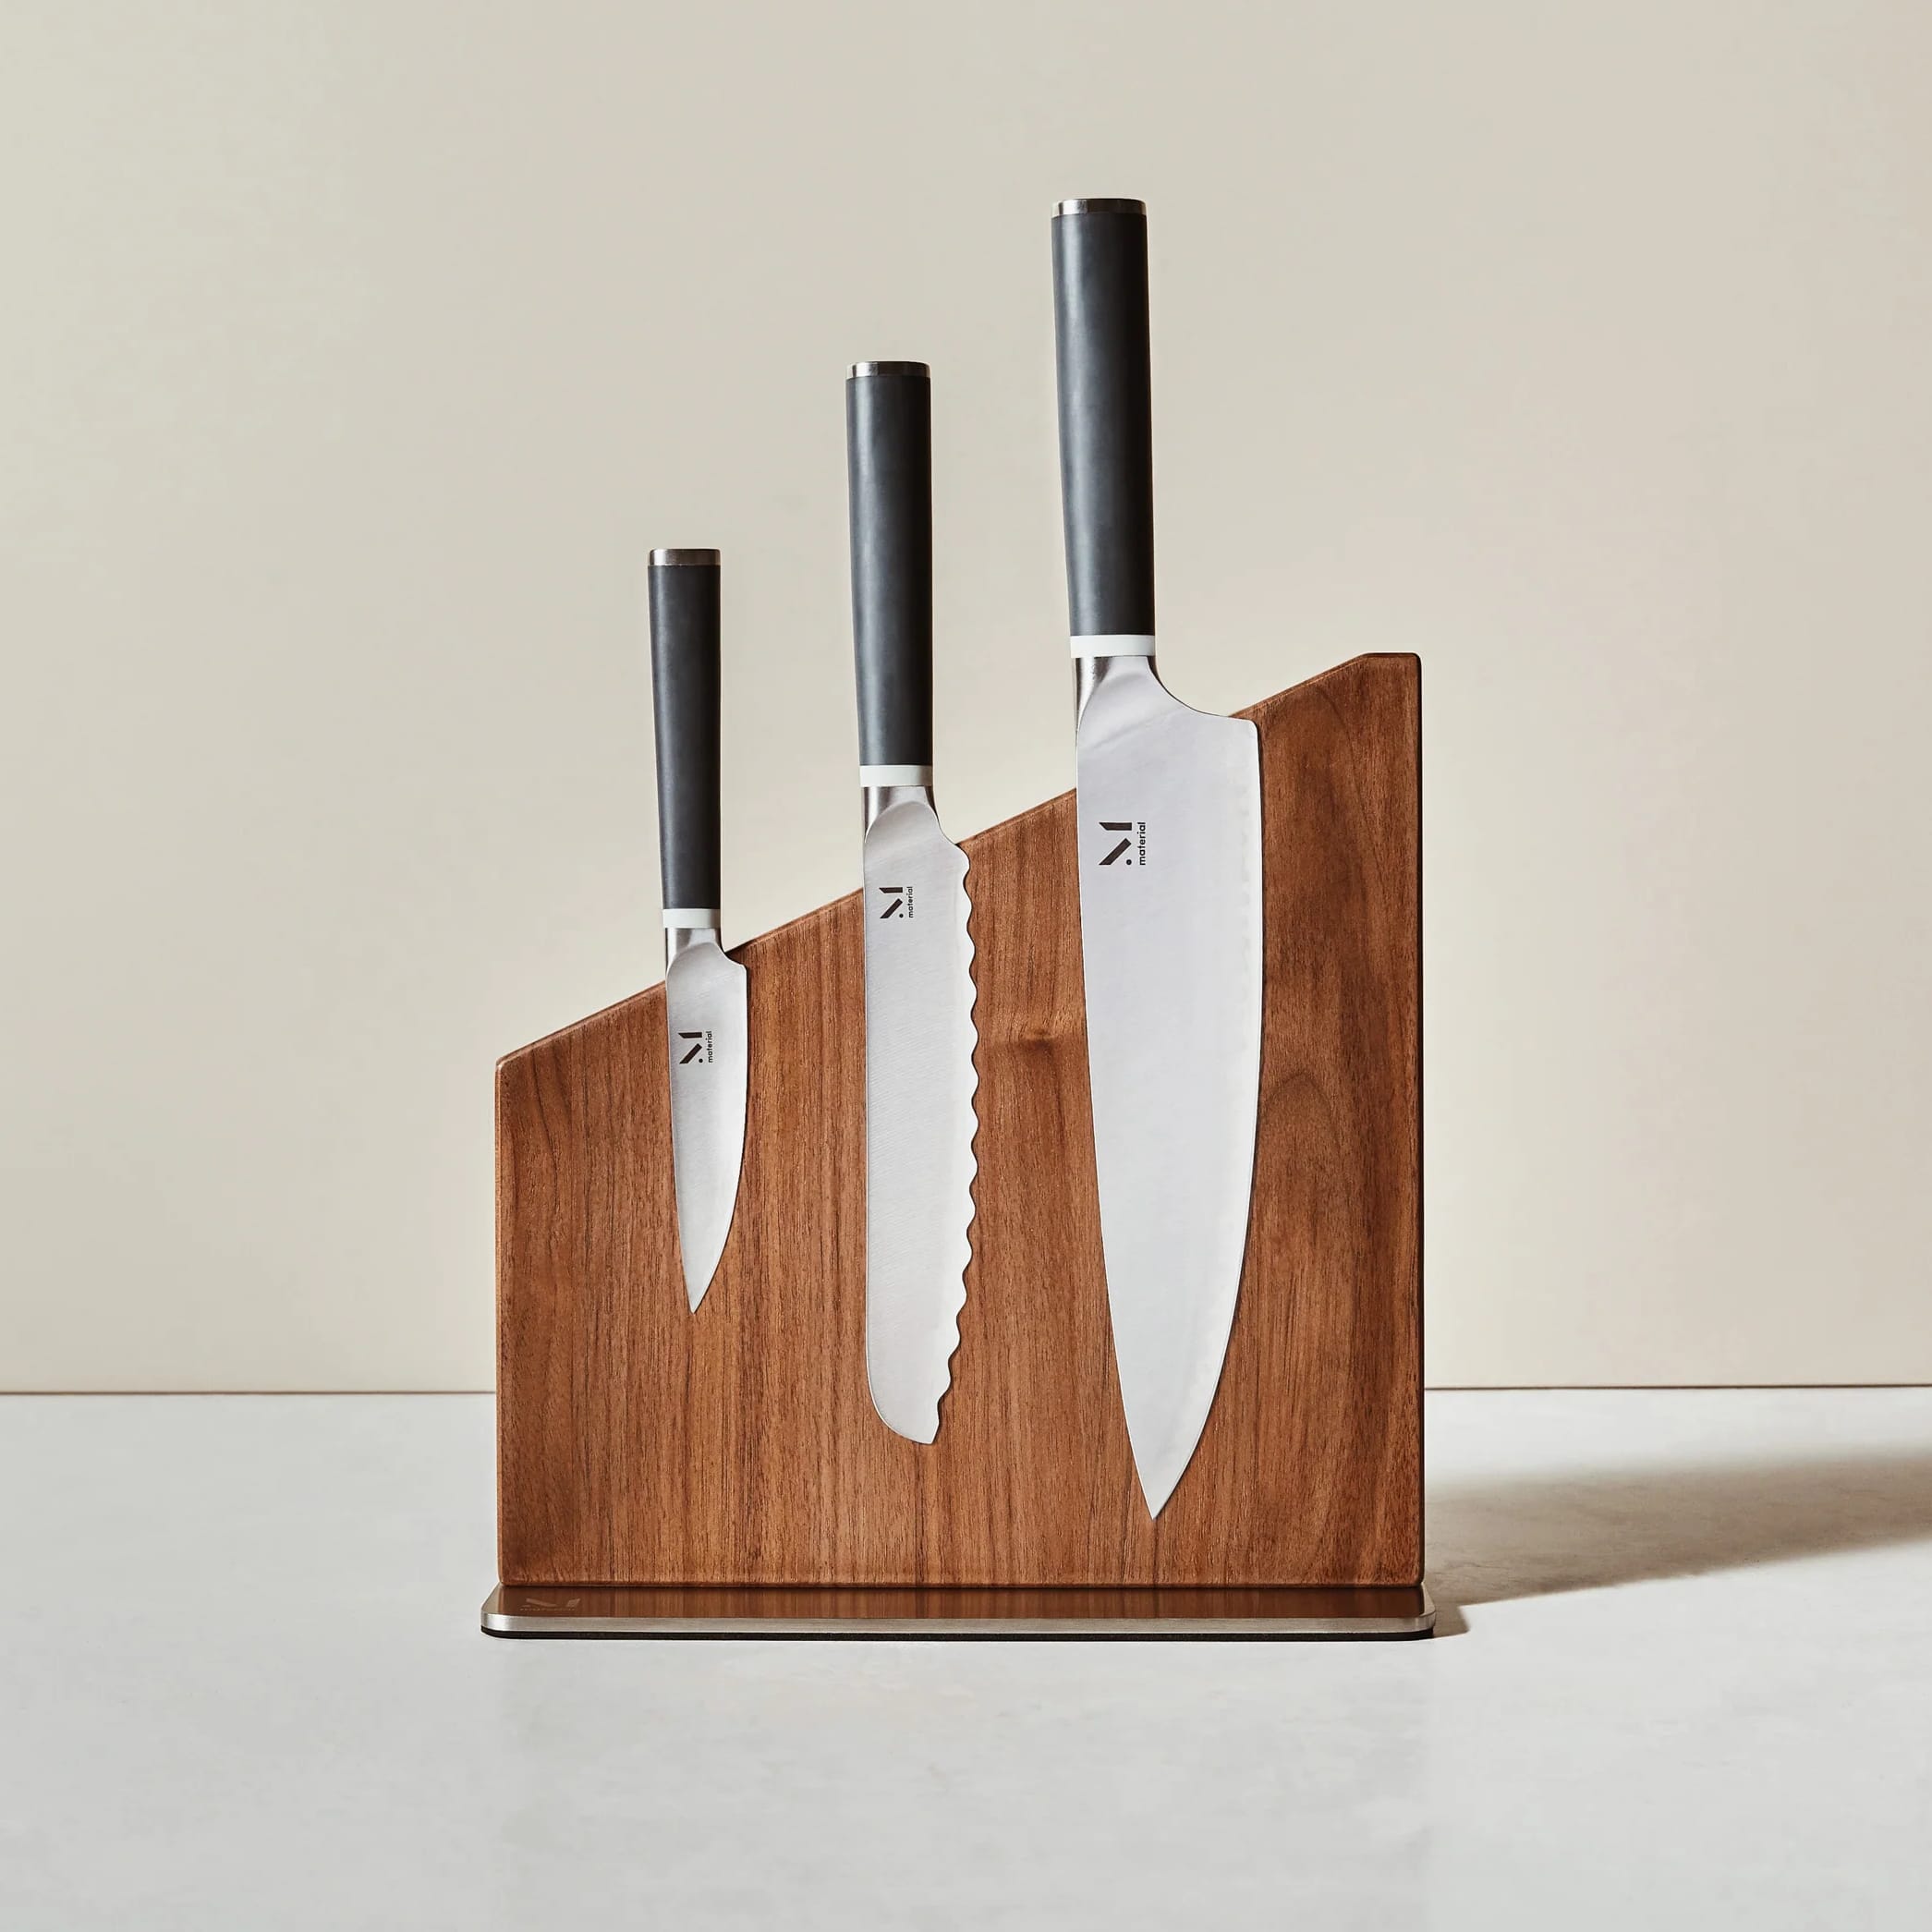 8 Best Knife Holders for 2021 - Top-Rated Knife Storage Blocks